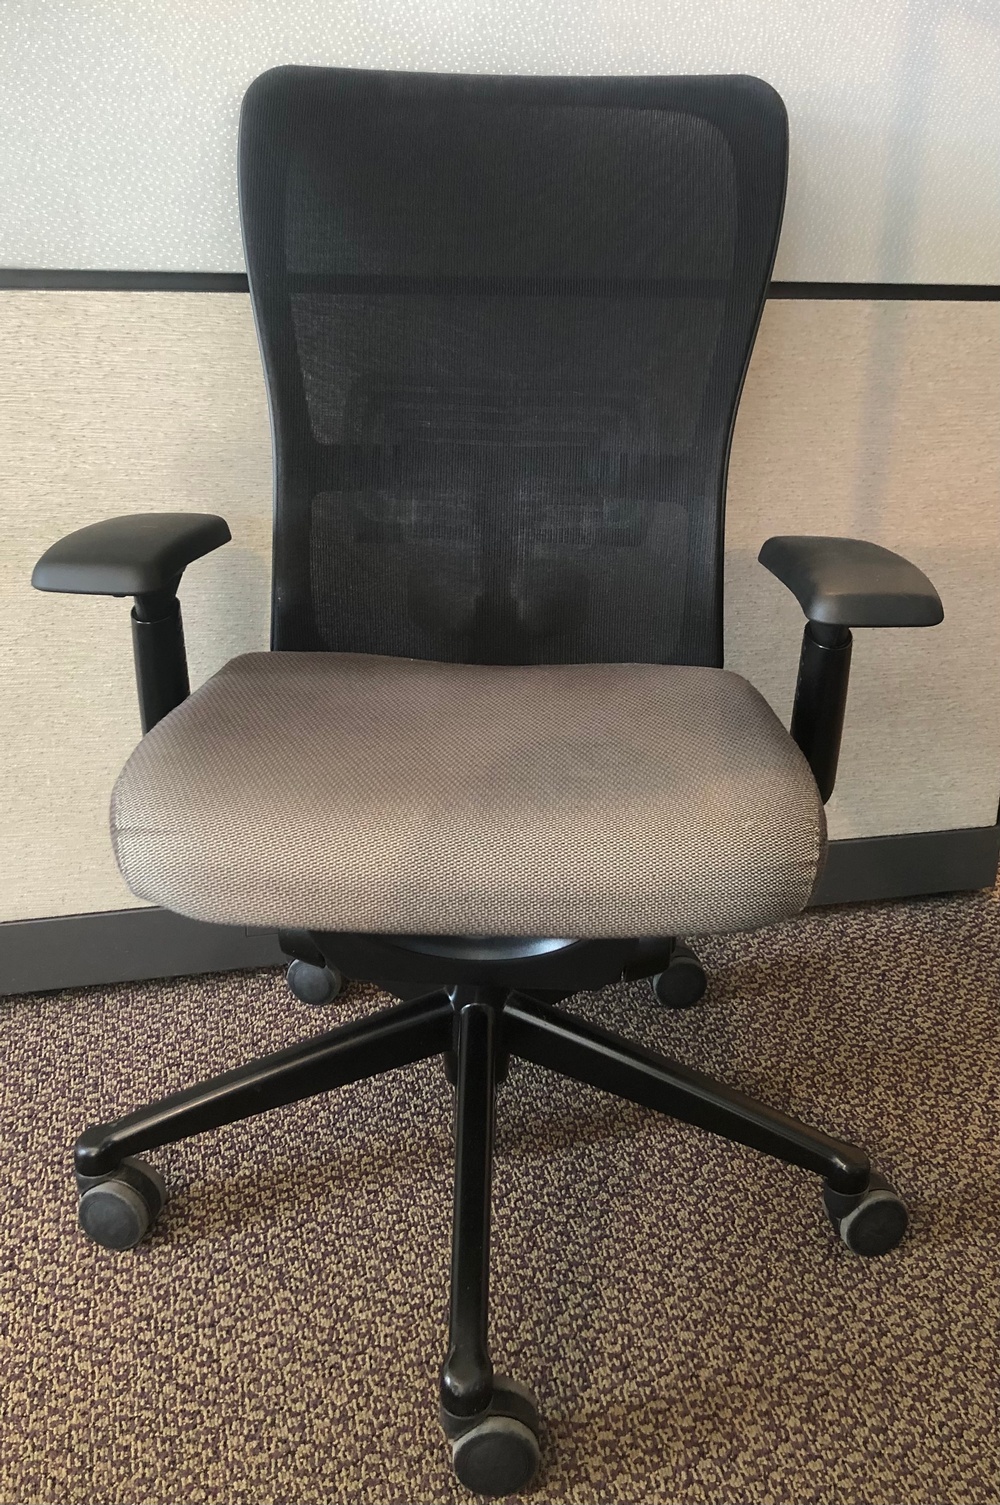 Eau Claire Business Interiors, Products, Used Seating - Task Chairs